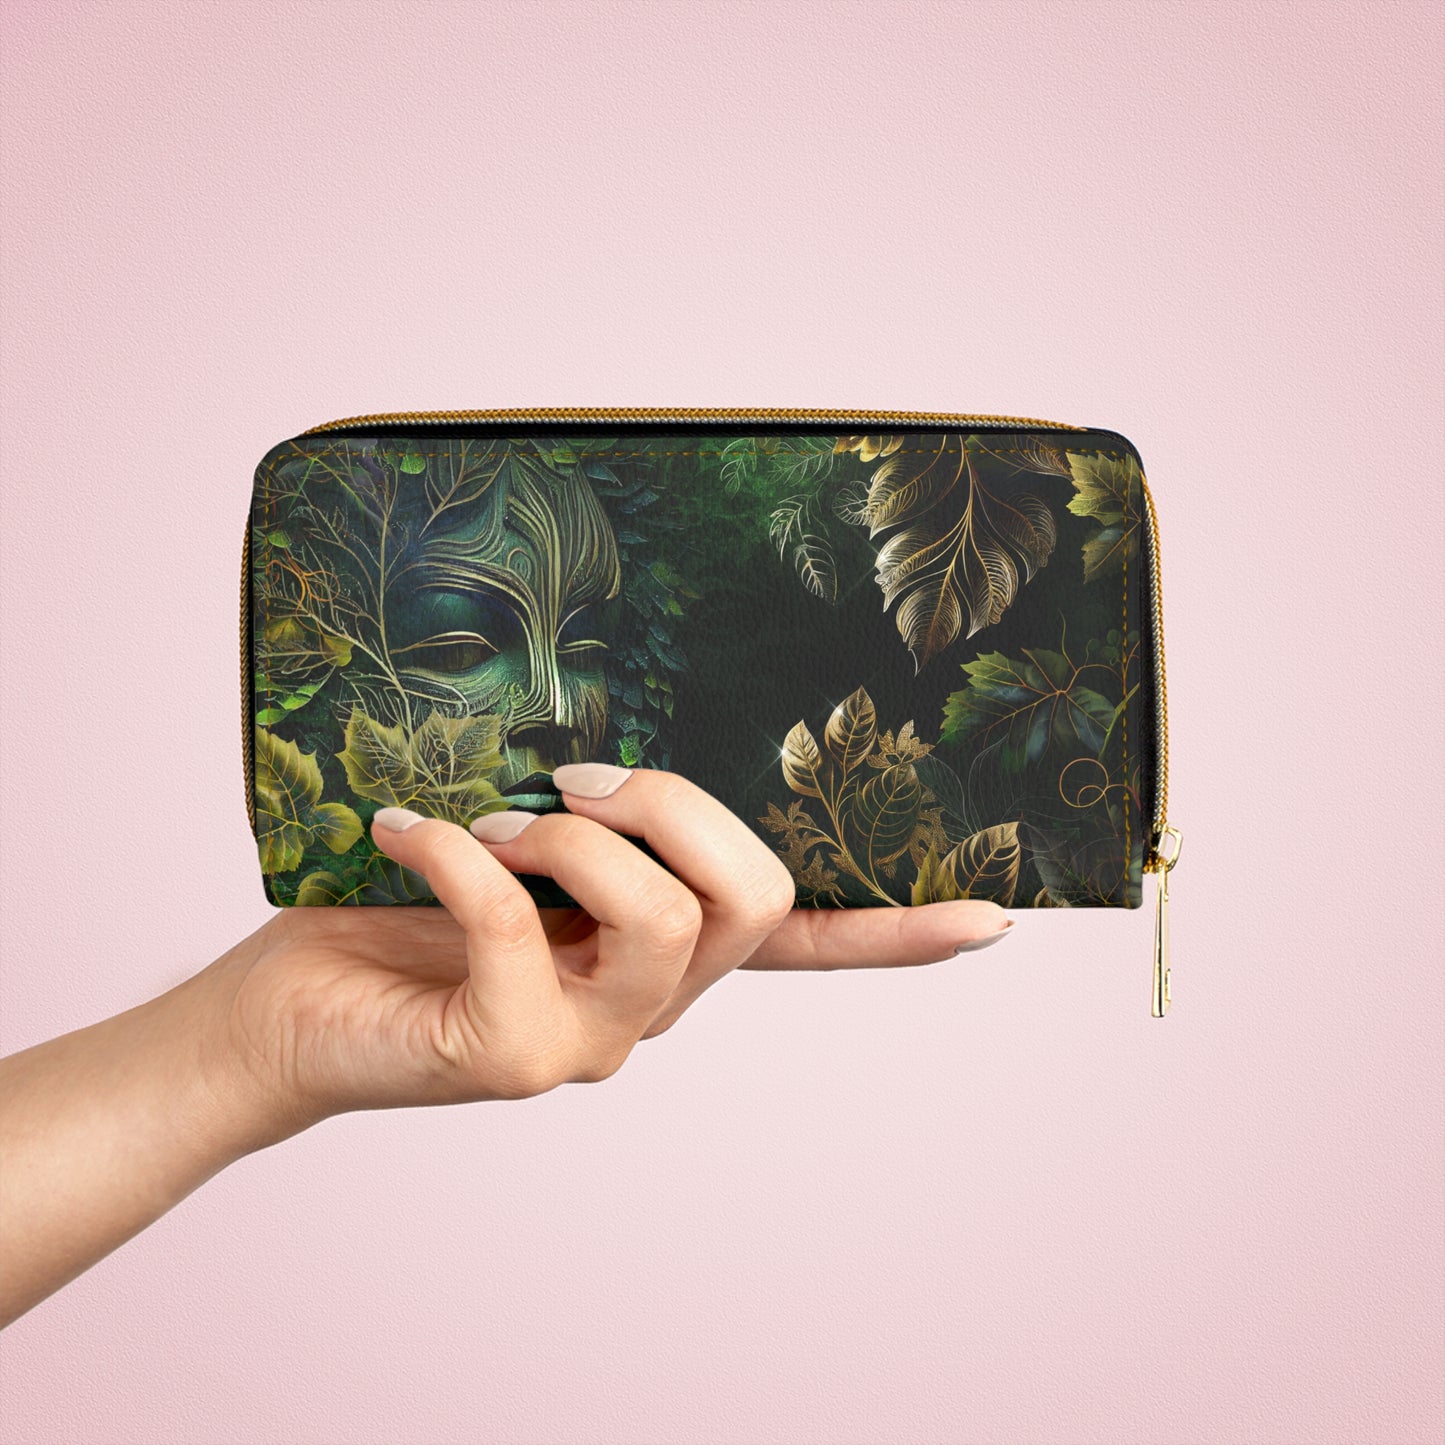 Magical Wood Nymph, Ethereal Forest Witch, Green Goddess Zipper Wallet